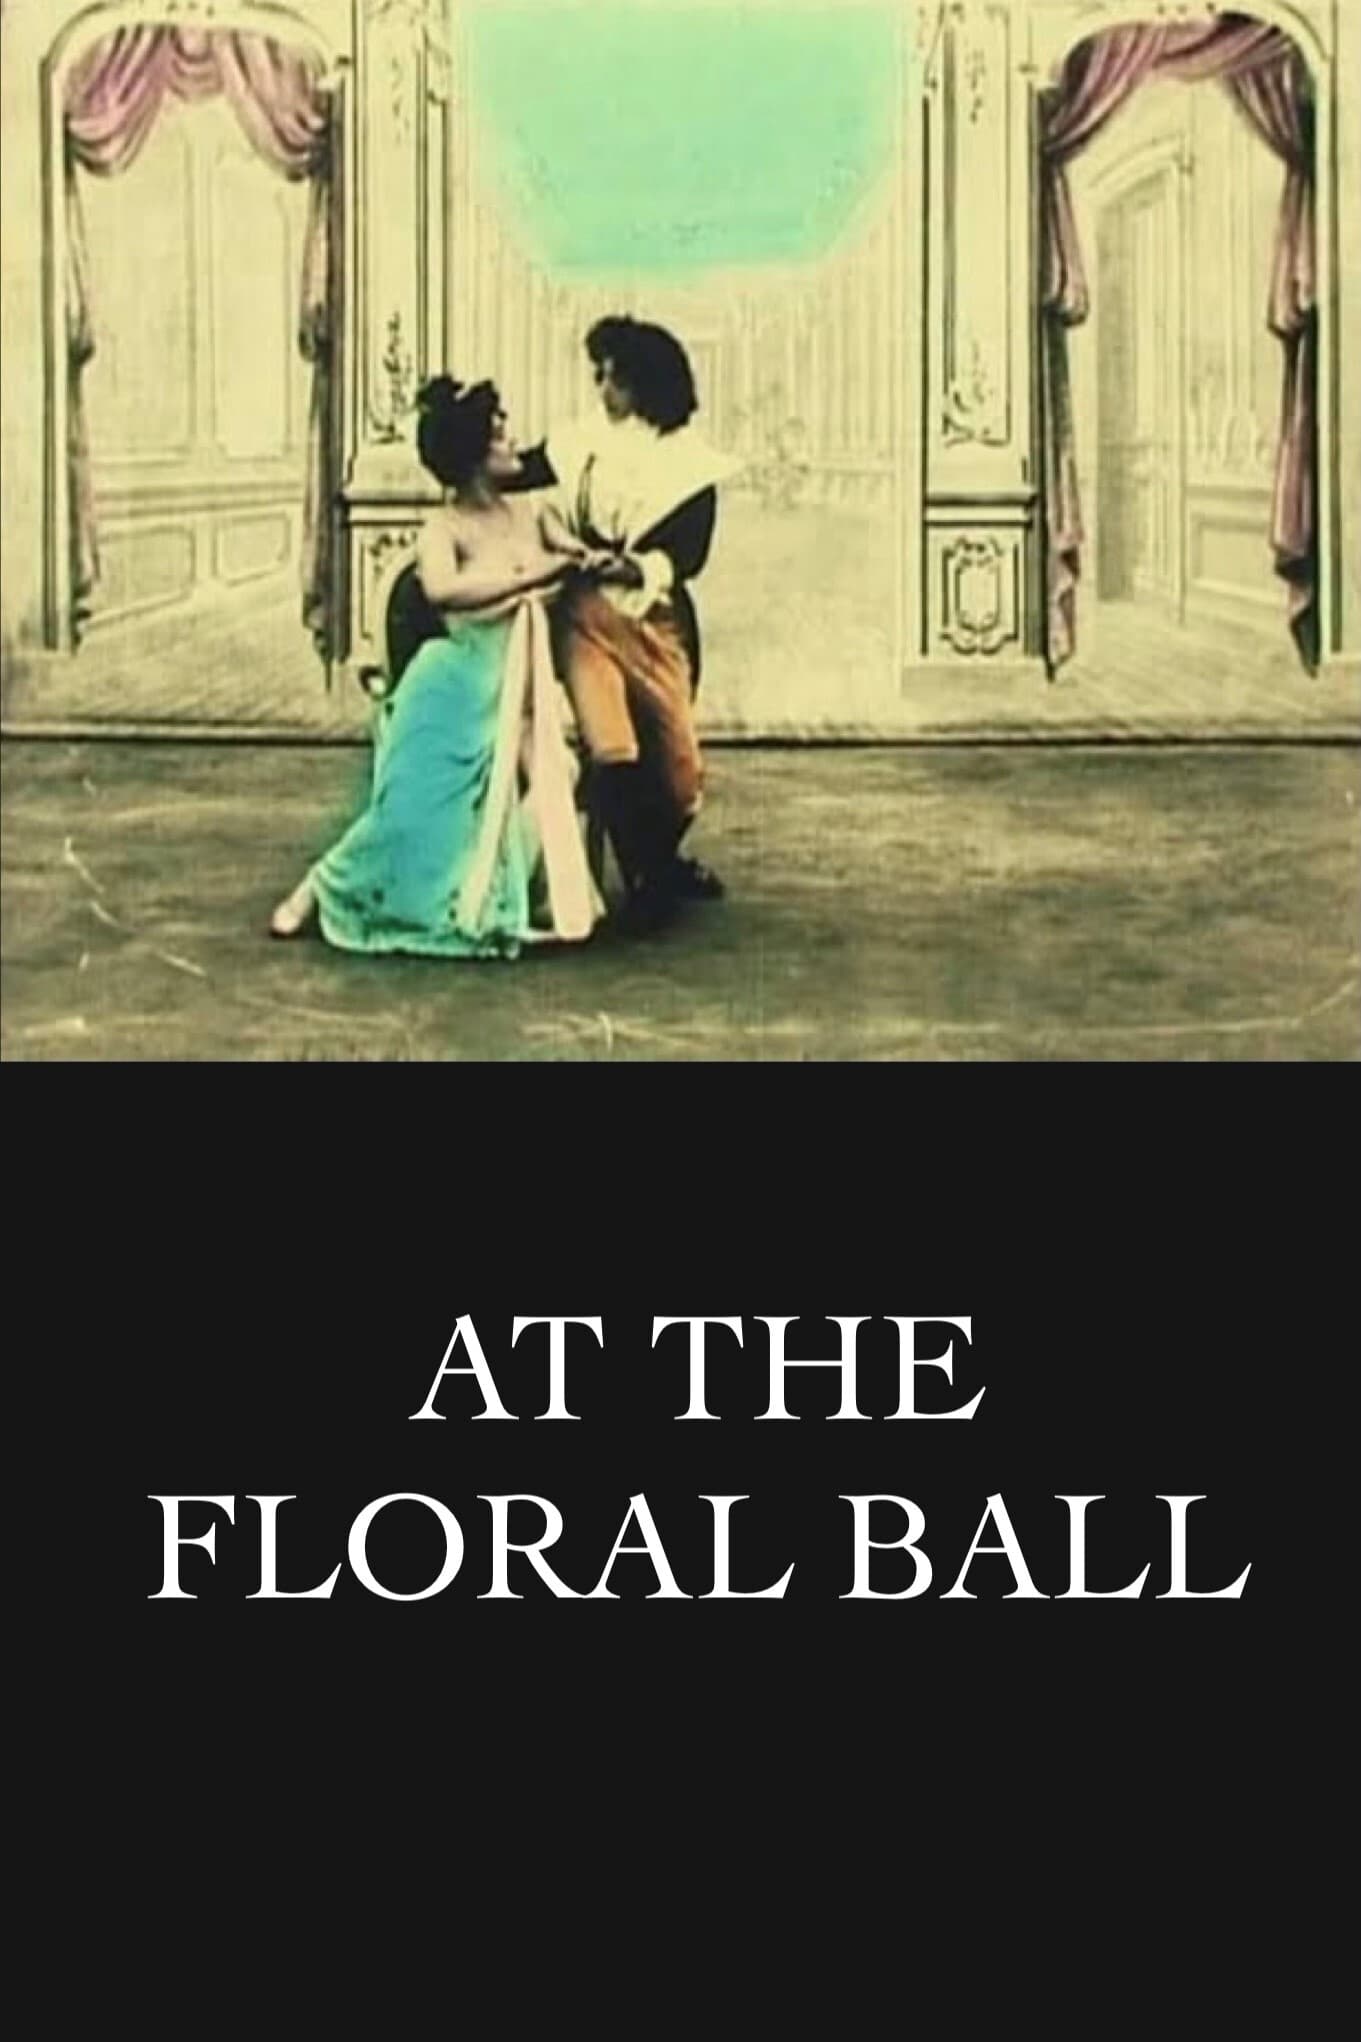 At the Floral Ball